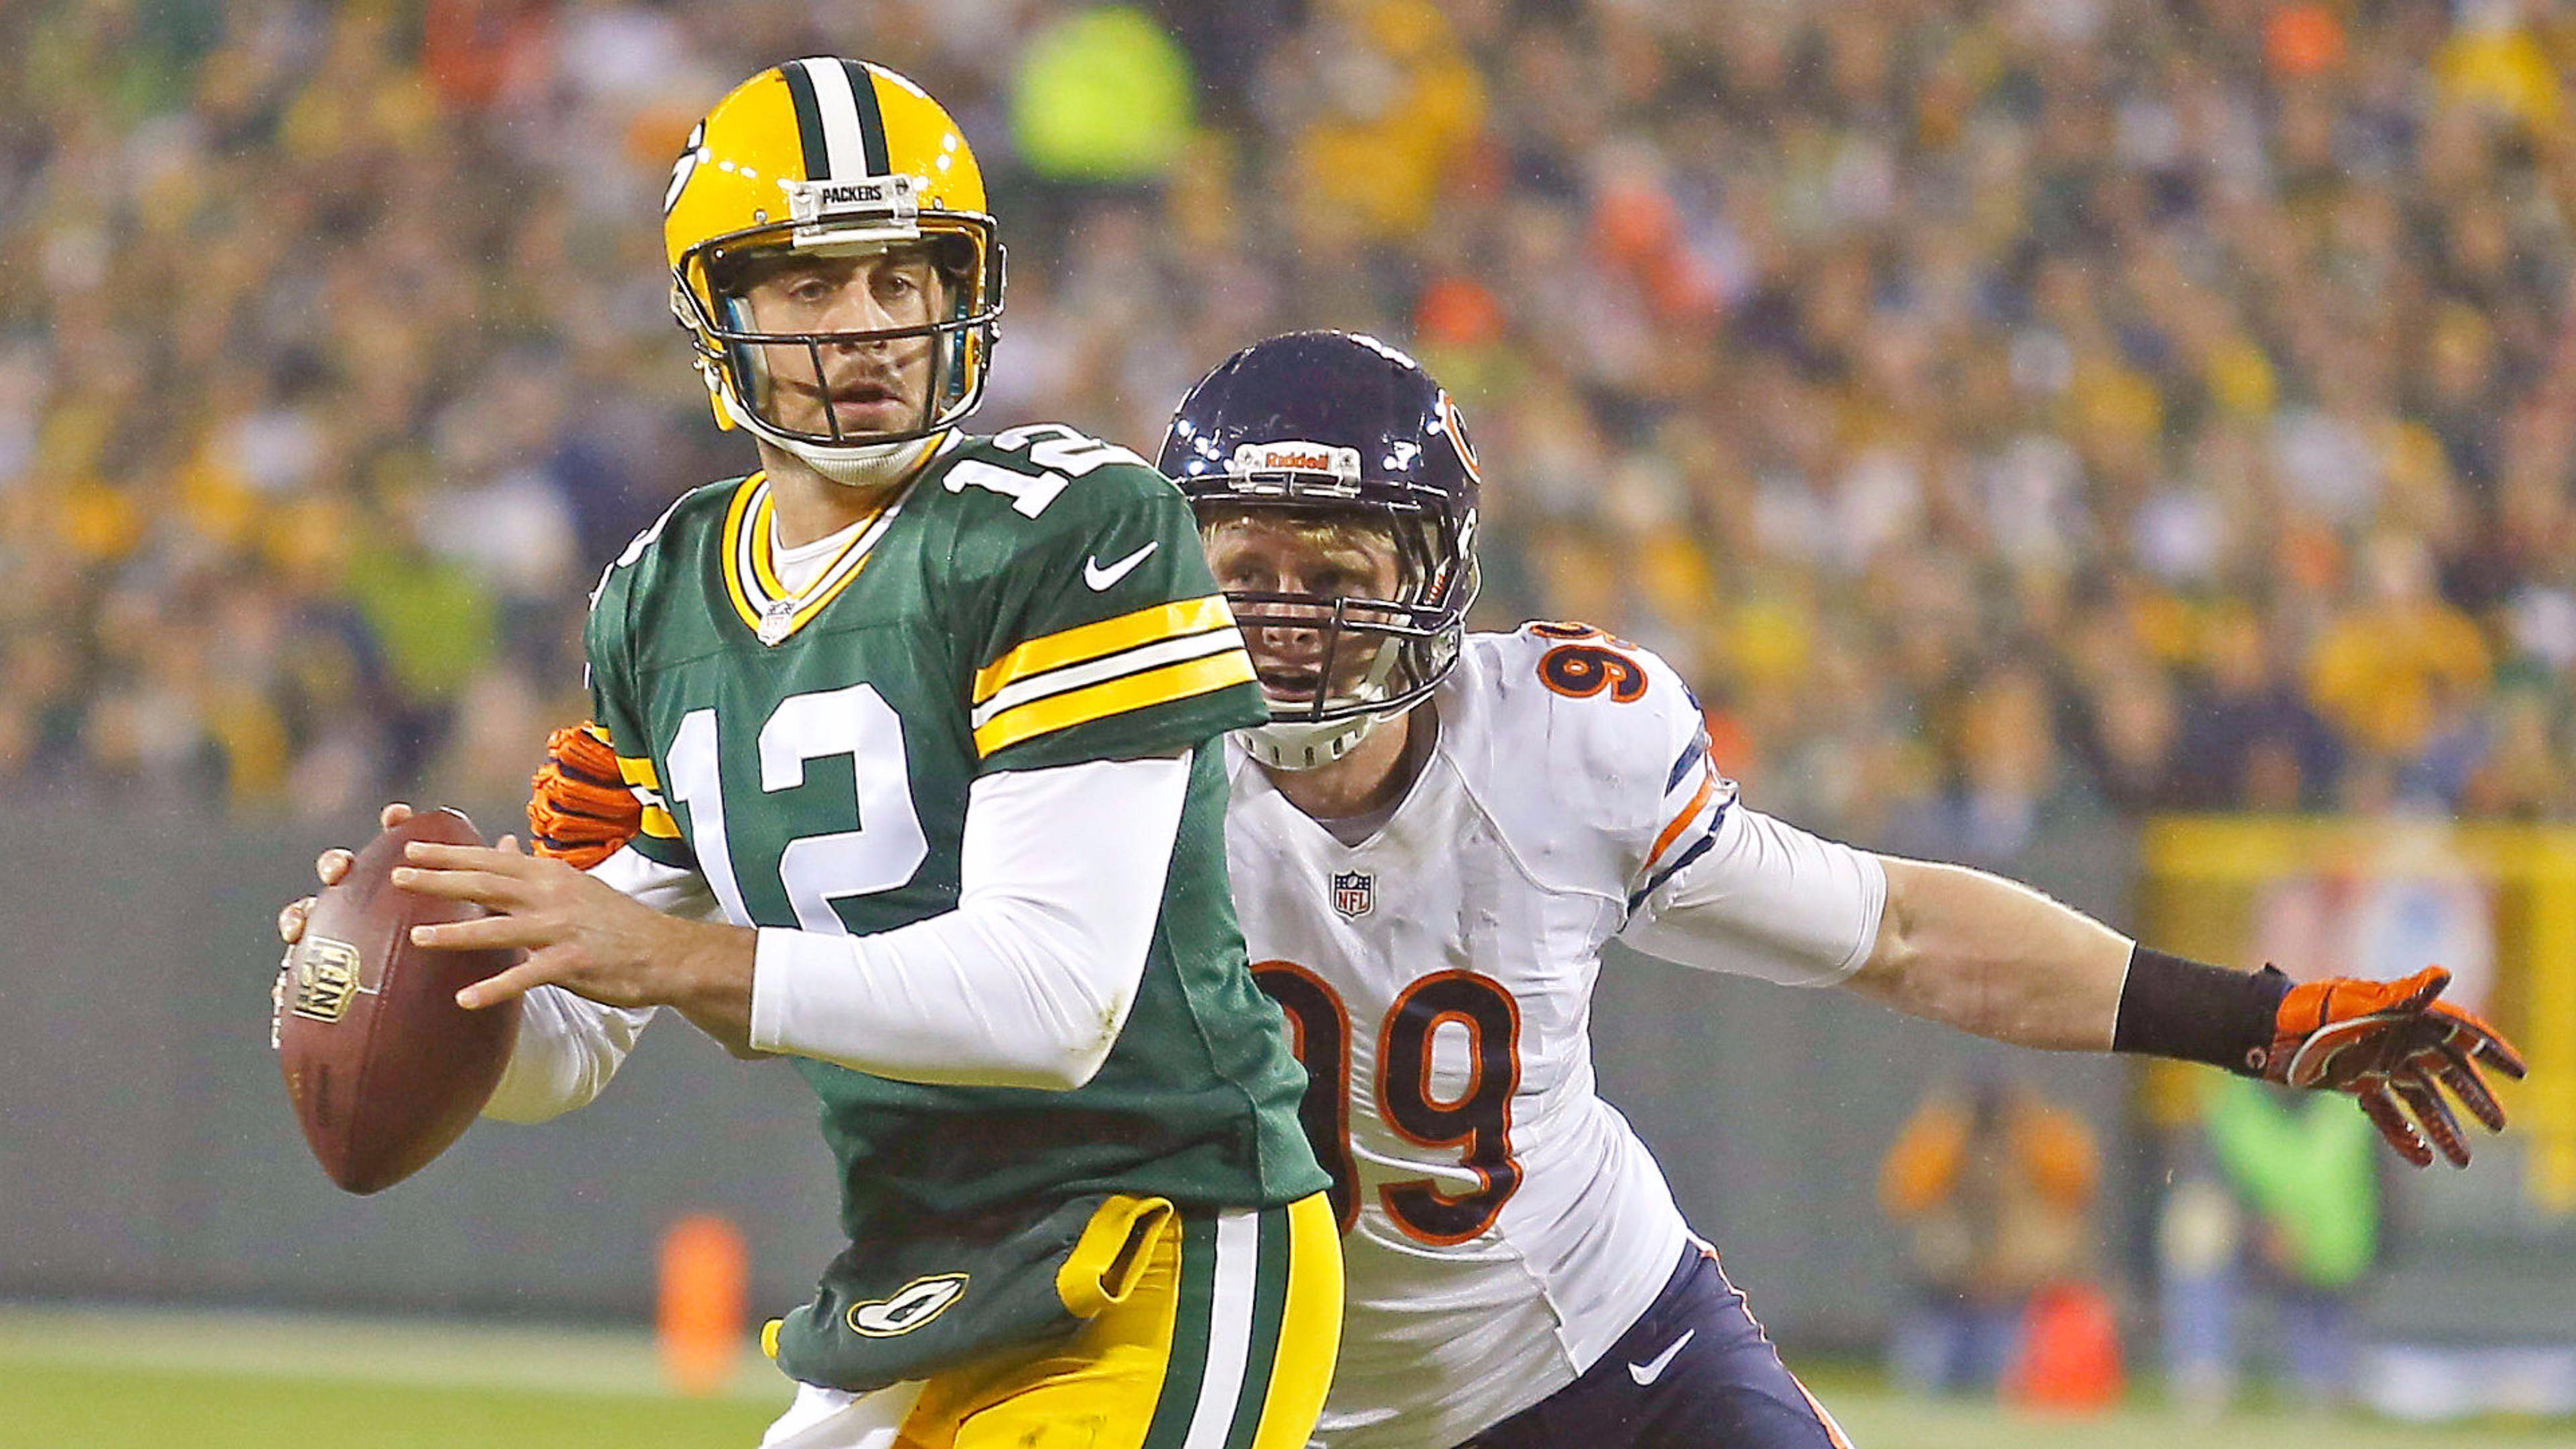 Chicago Bears Vs 2016 Aaron Rodgers Large Image 4K Wallpaper HD